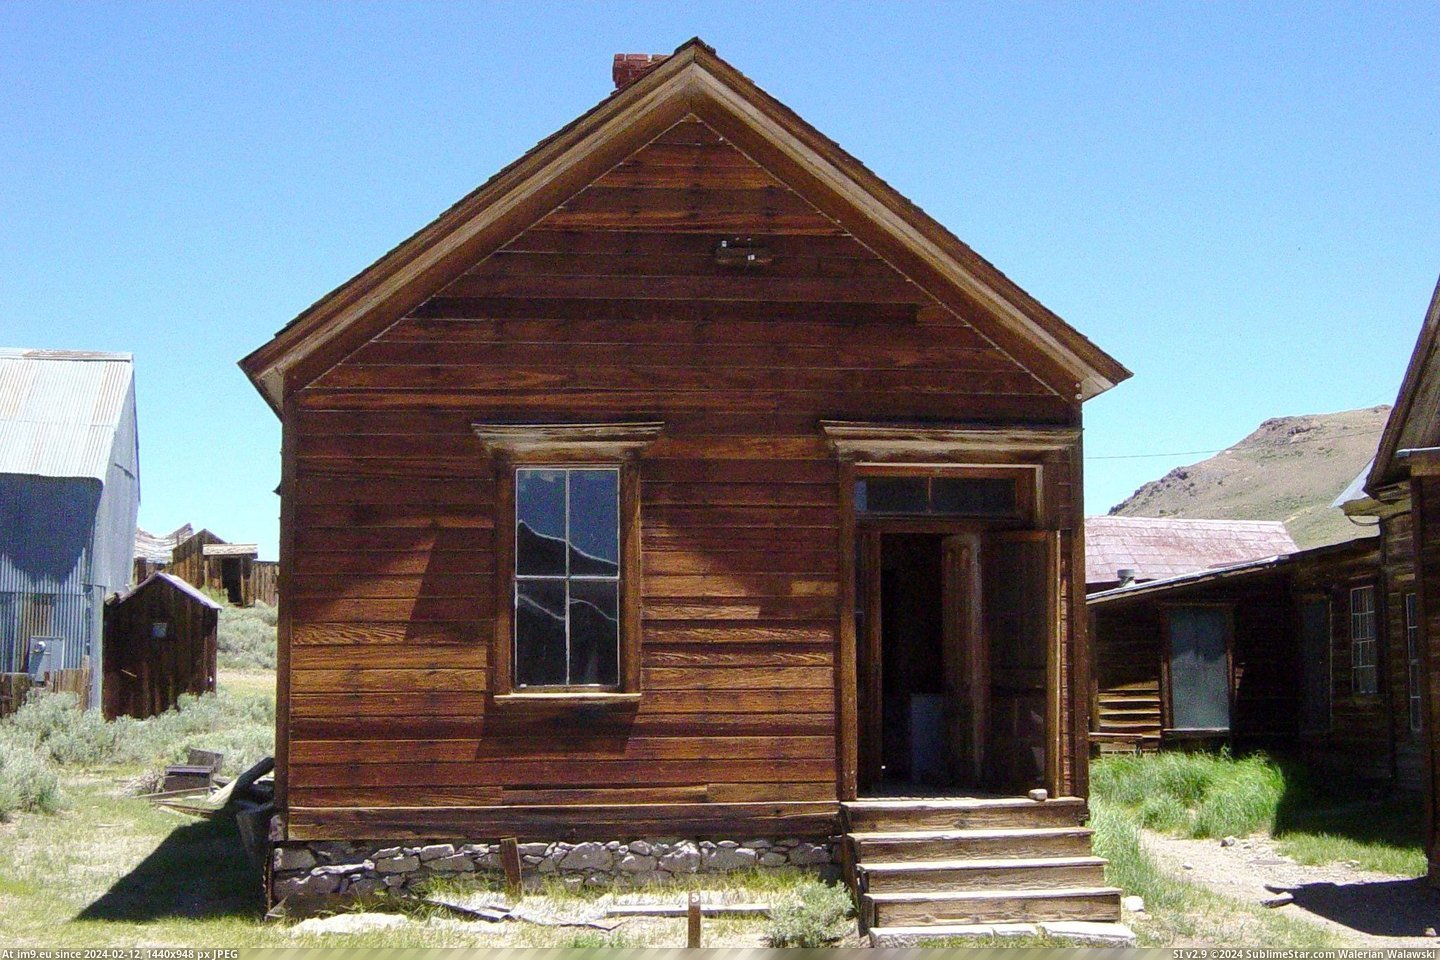 #California #Miller #Bodie #House Miller House In Bodie, California Pic. (Изображение из альбом Bodie - a ghost town in Eastern California))